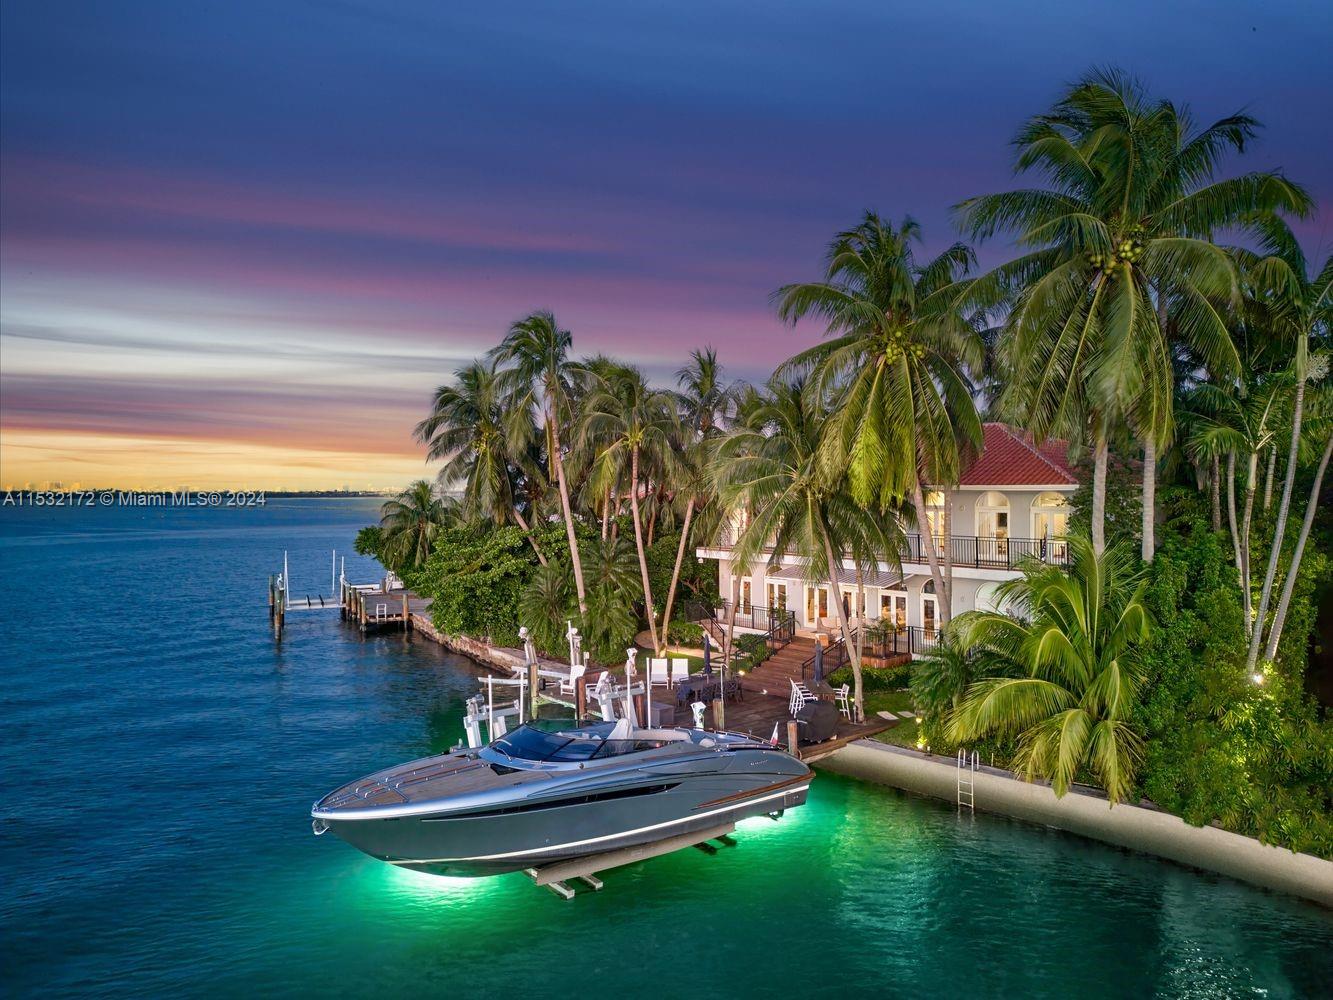 One of the very best lots on the Venetian Islands is now available. An oversized corner lot with 13,383 square feet and an extremely rare 123 feet of waterfrontage, ideally positioned at the very tip of Dilido Island far from the action bustle. Whether by day or night, one can enjoy postcard perfect unobstructed and direct western open bay views of the Miami skyline. Situated on this forever lot is a beautifully renovated 4 bedroom - 5 bathroom home with separate guest house featuring an oasis style front yard and pool area completely obscured from the street. Excellent layout with noticeably high ceilings on both levels, an expansive master suite with giant walk-in closets, and a massive windowed master bathroom from which to indulge in panoramic views.